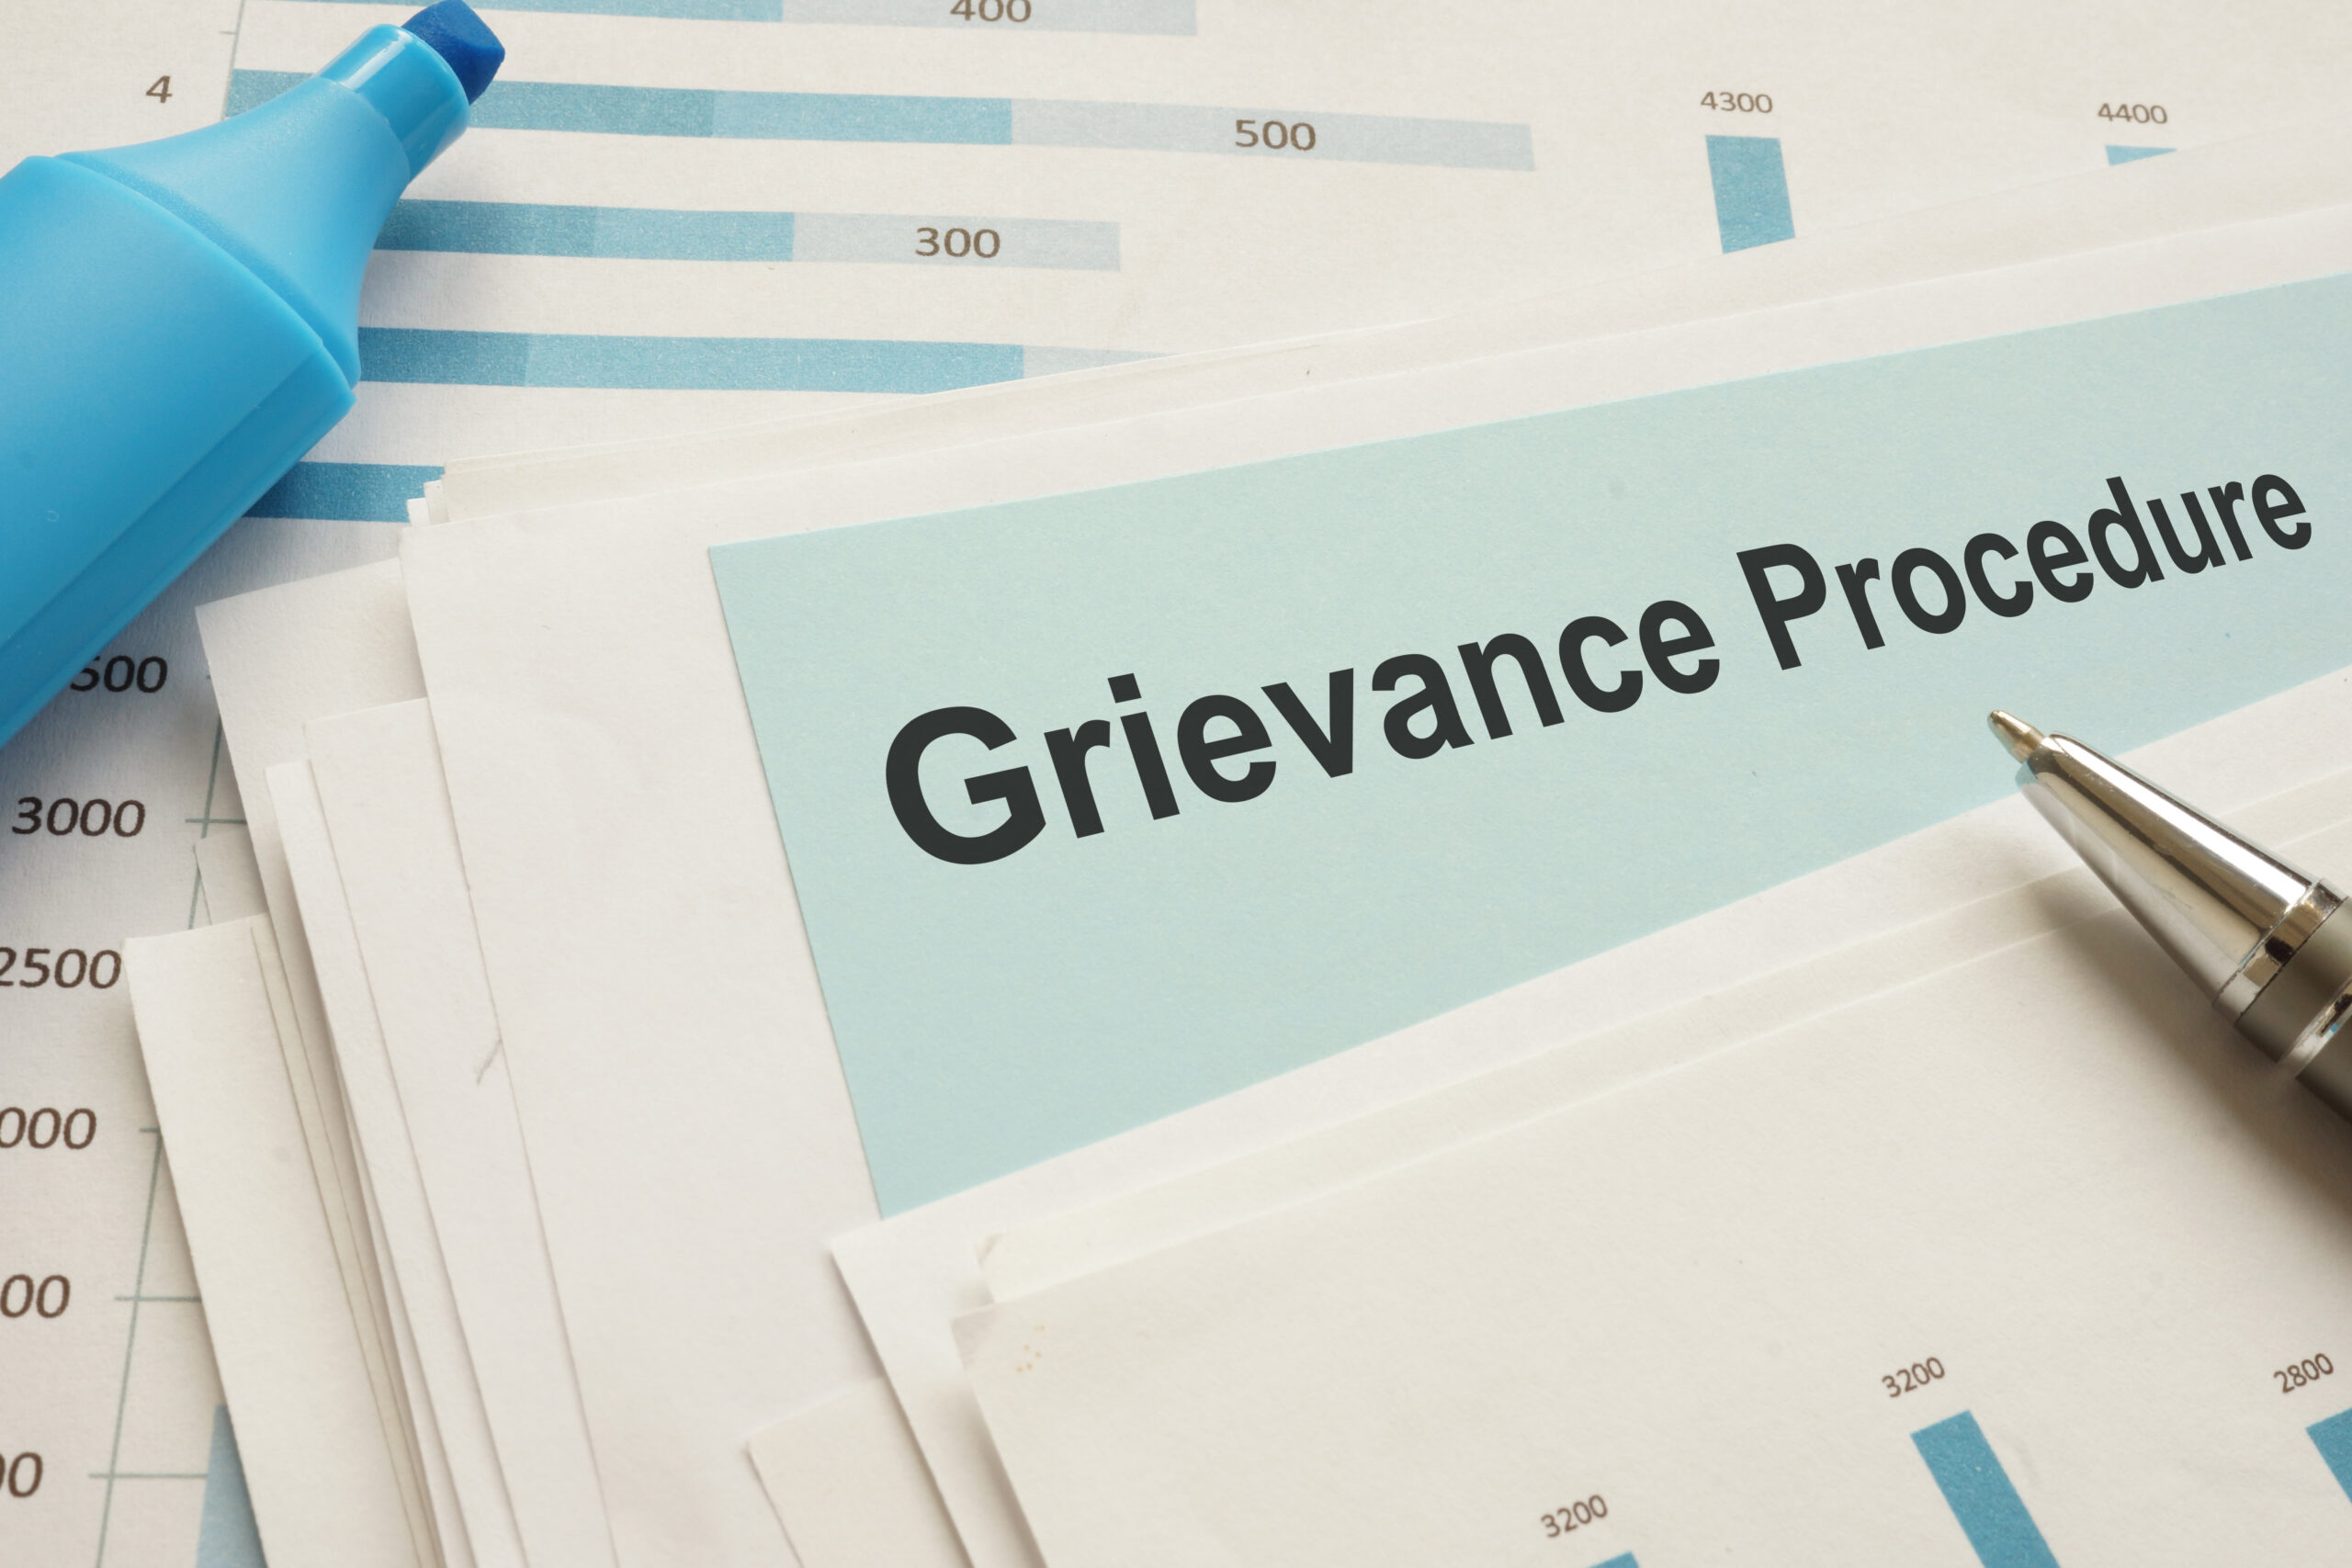 Grievance procedure is shown on the photo using the text